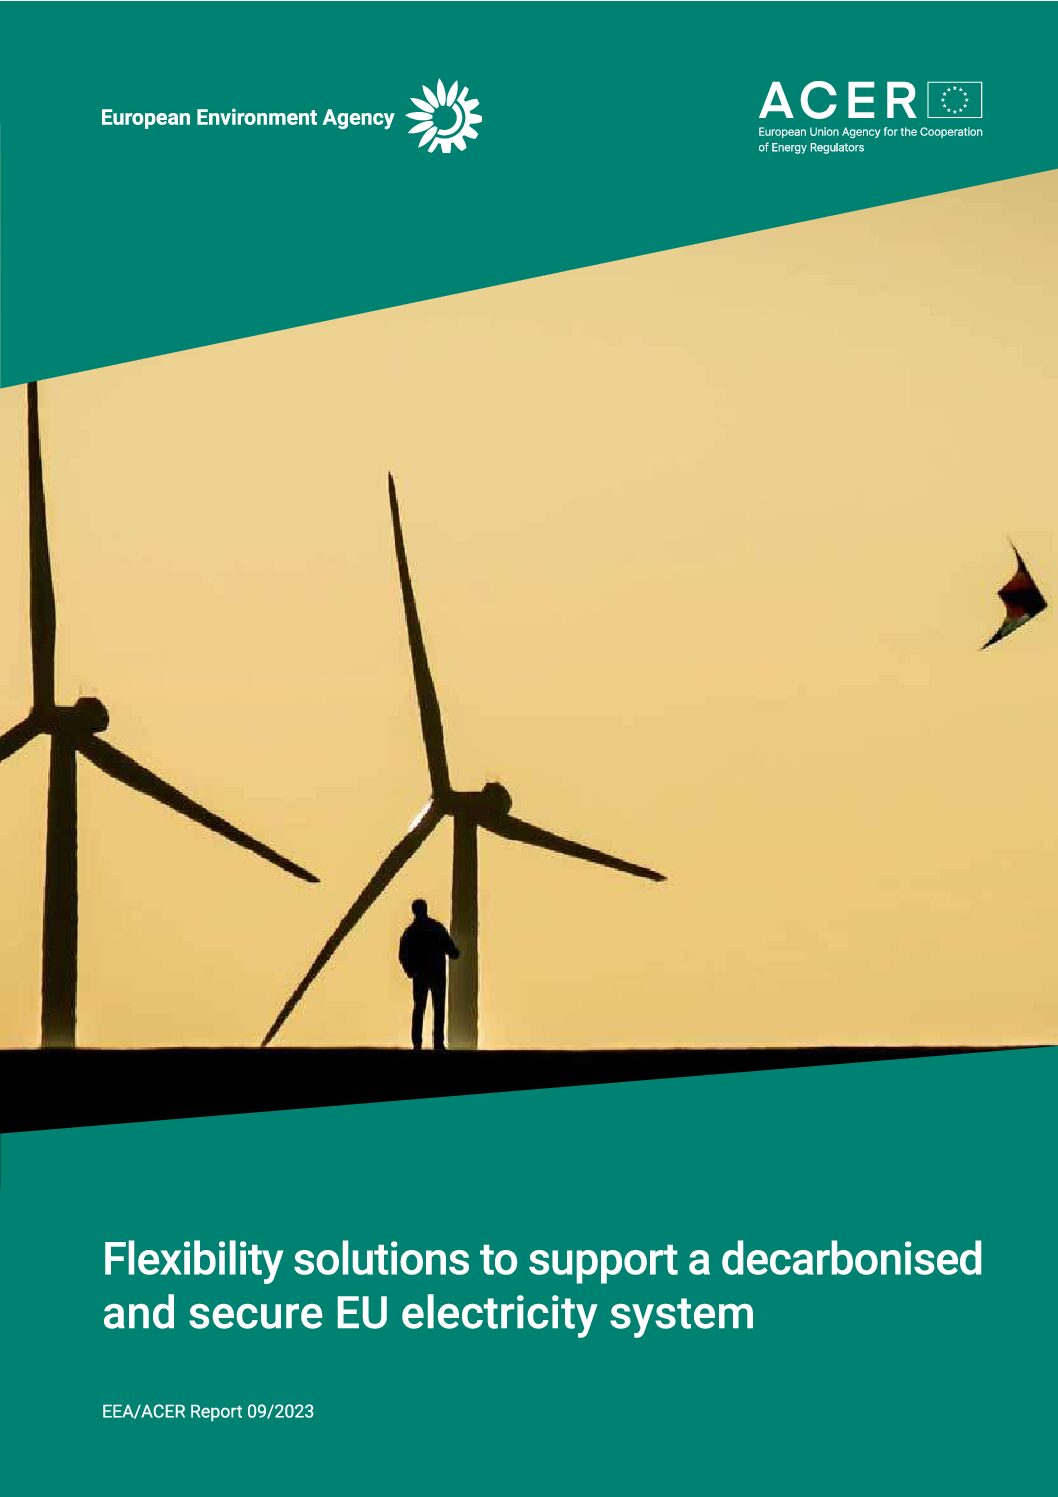 https://img.saurenergy.com/2023/10/1-flexibility-solutions-to-support-a-decarbonised-and-secure-eu-electricity-system-pdf.jpg